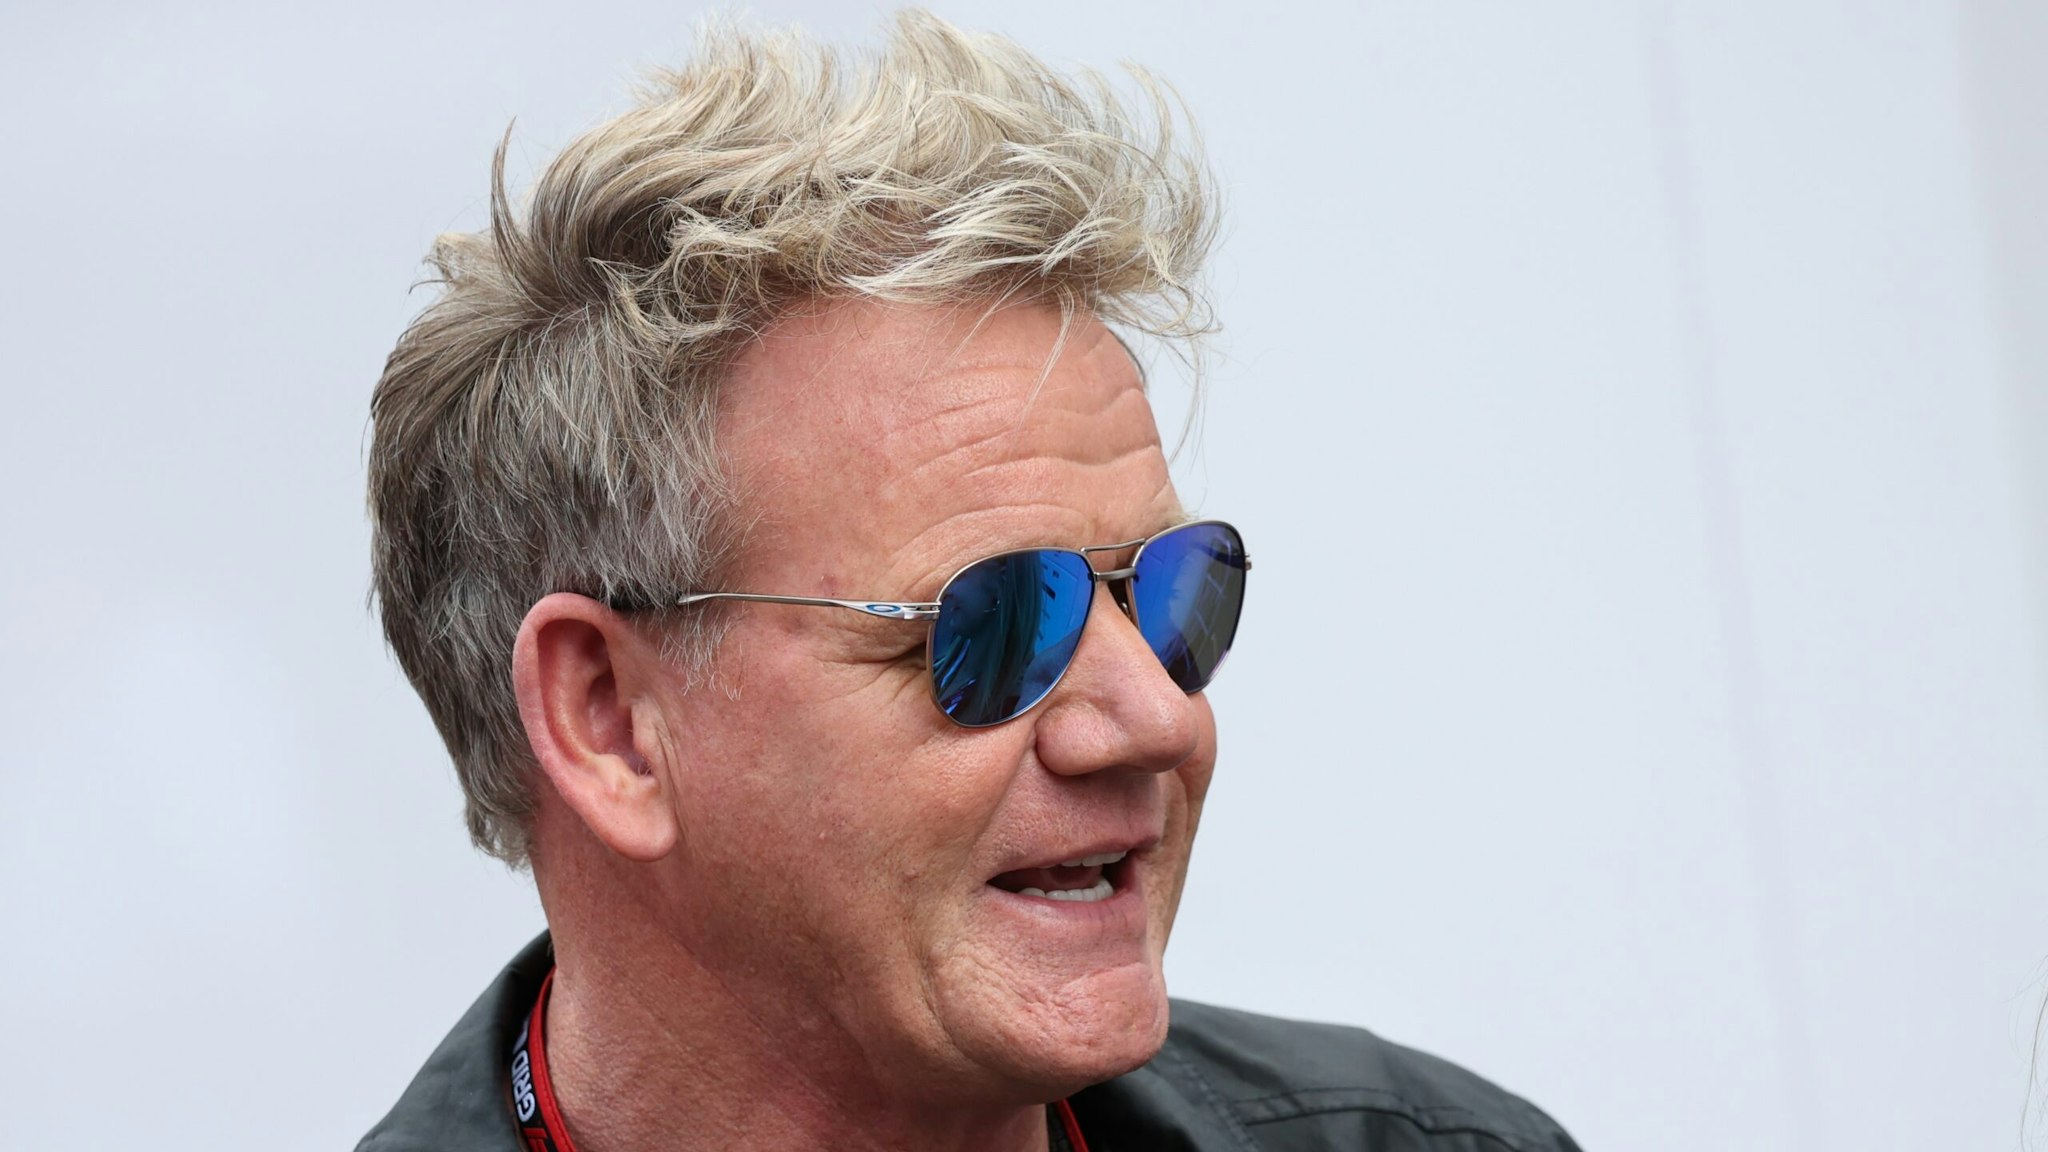 Gordon Ramsay in the paddock before the sprint for the Formula 1 Austrian Grand Prix at Red Bull Ring in Spielberg, Austria on July 9, 2022.